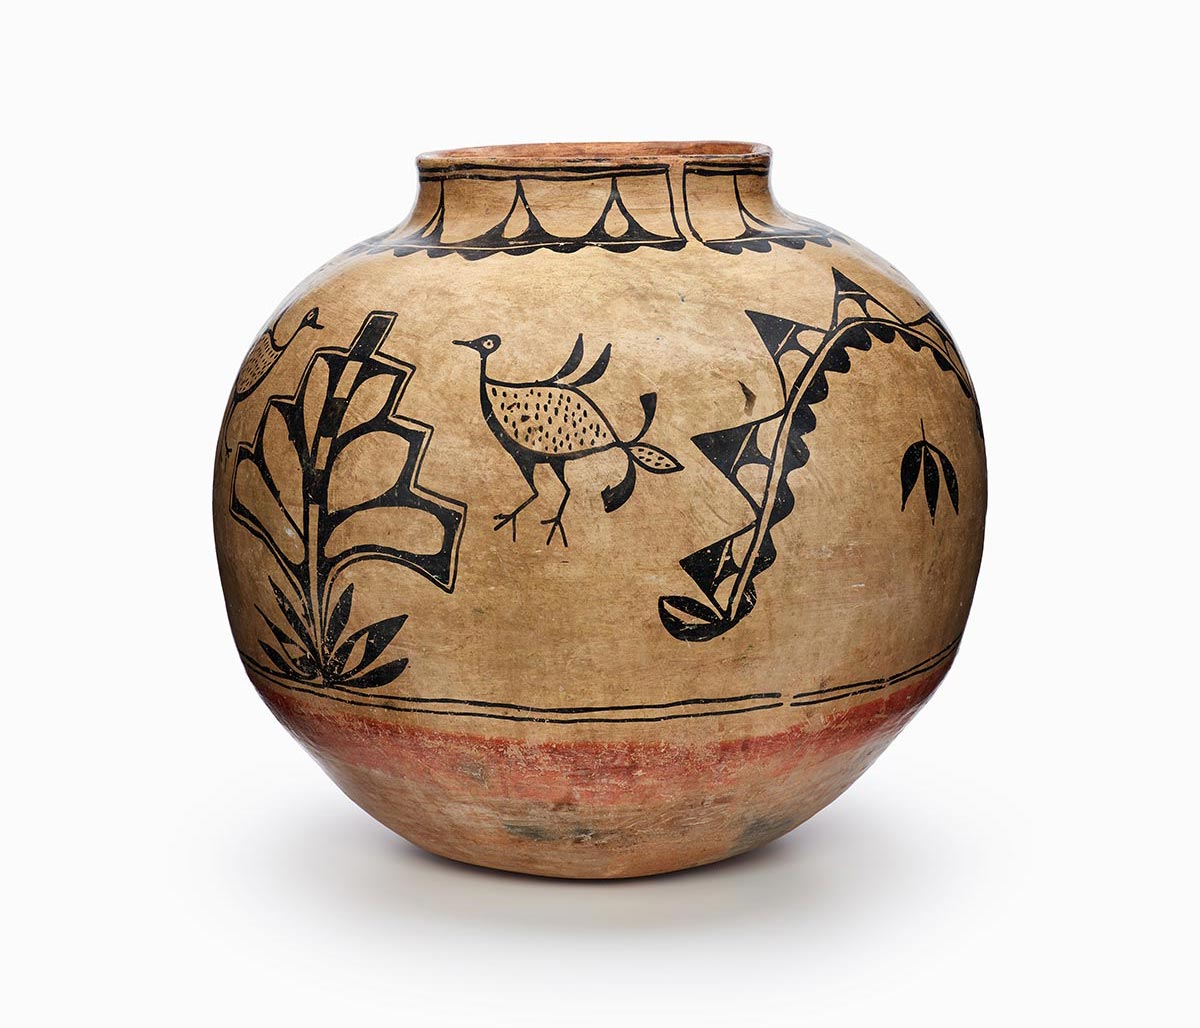 A three-color Cochiti polychrome storage jar featuring white slip with black and red painted decoration.